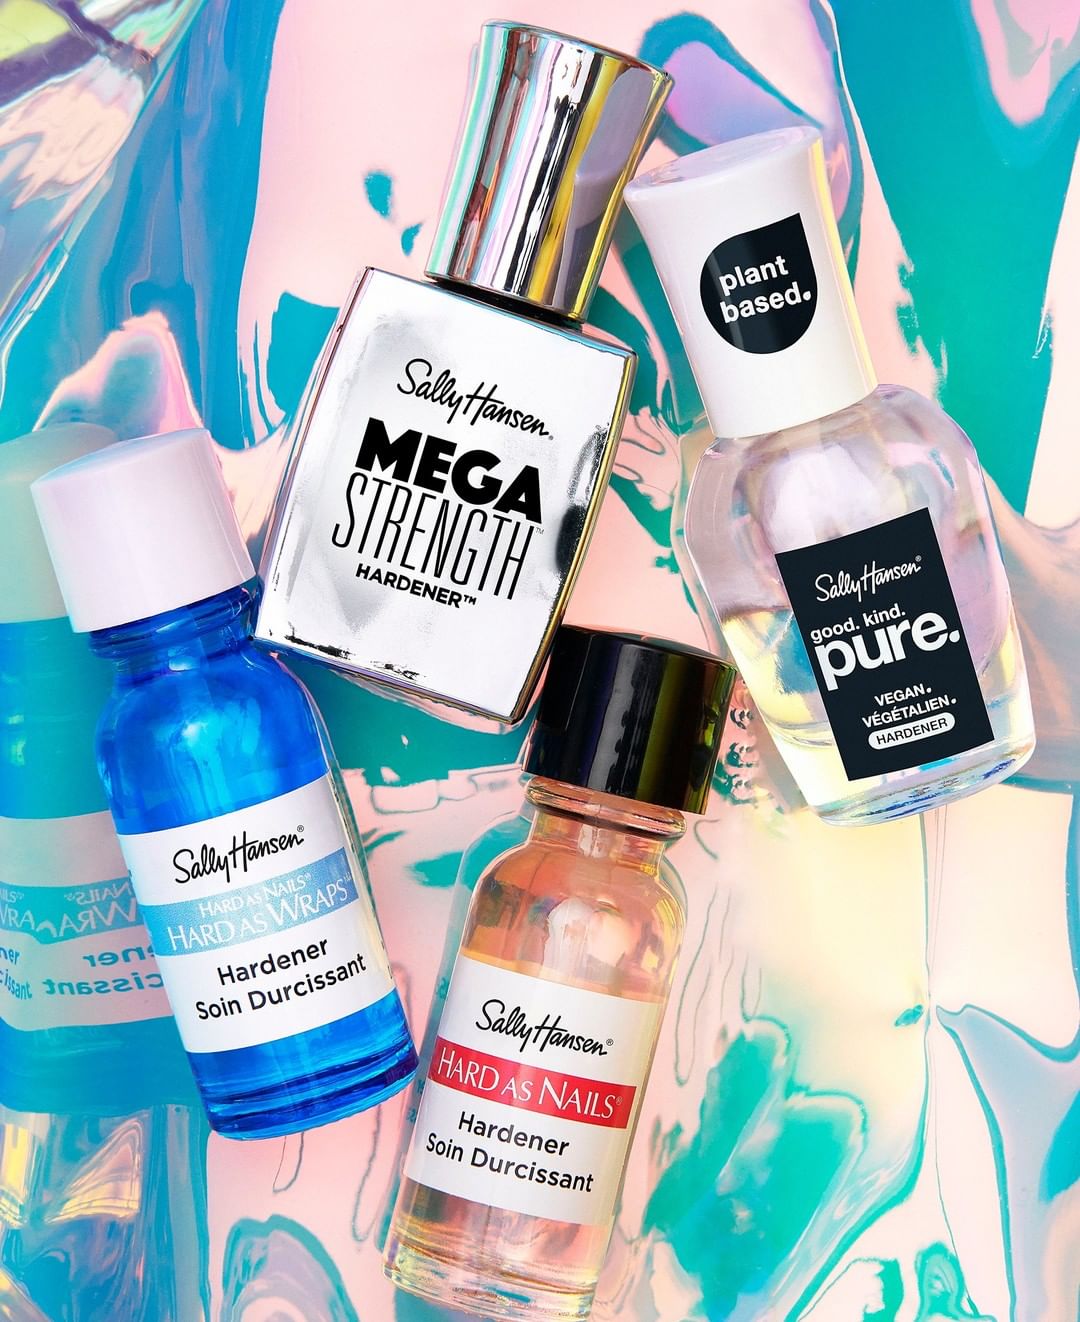 Sally Hansen - #SelfCareSunday: #SallyStrong edition 💪. Check out some of our favorite nail hardeners to protect your nails against cracking, splitting, peeling and chipping!